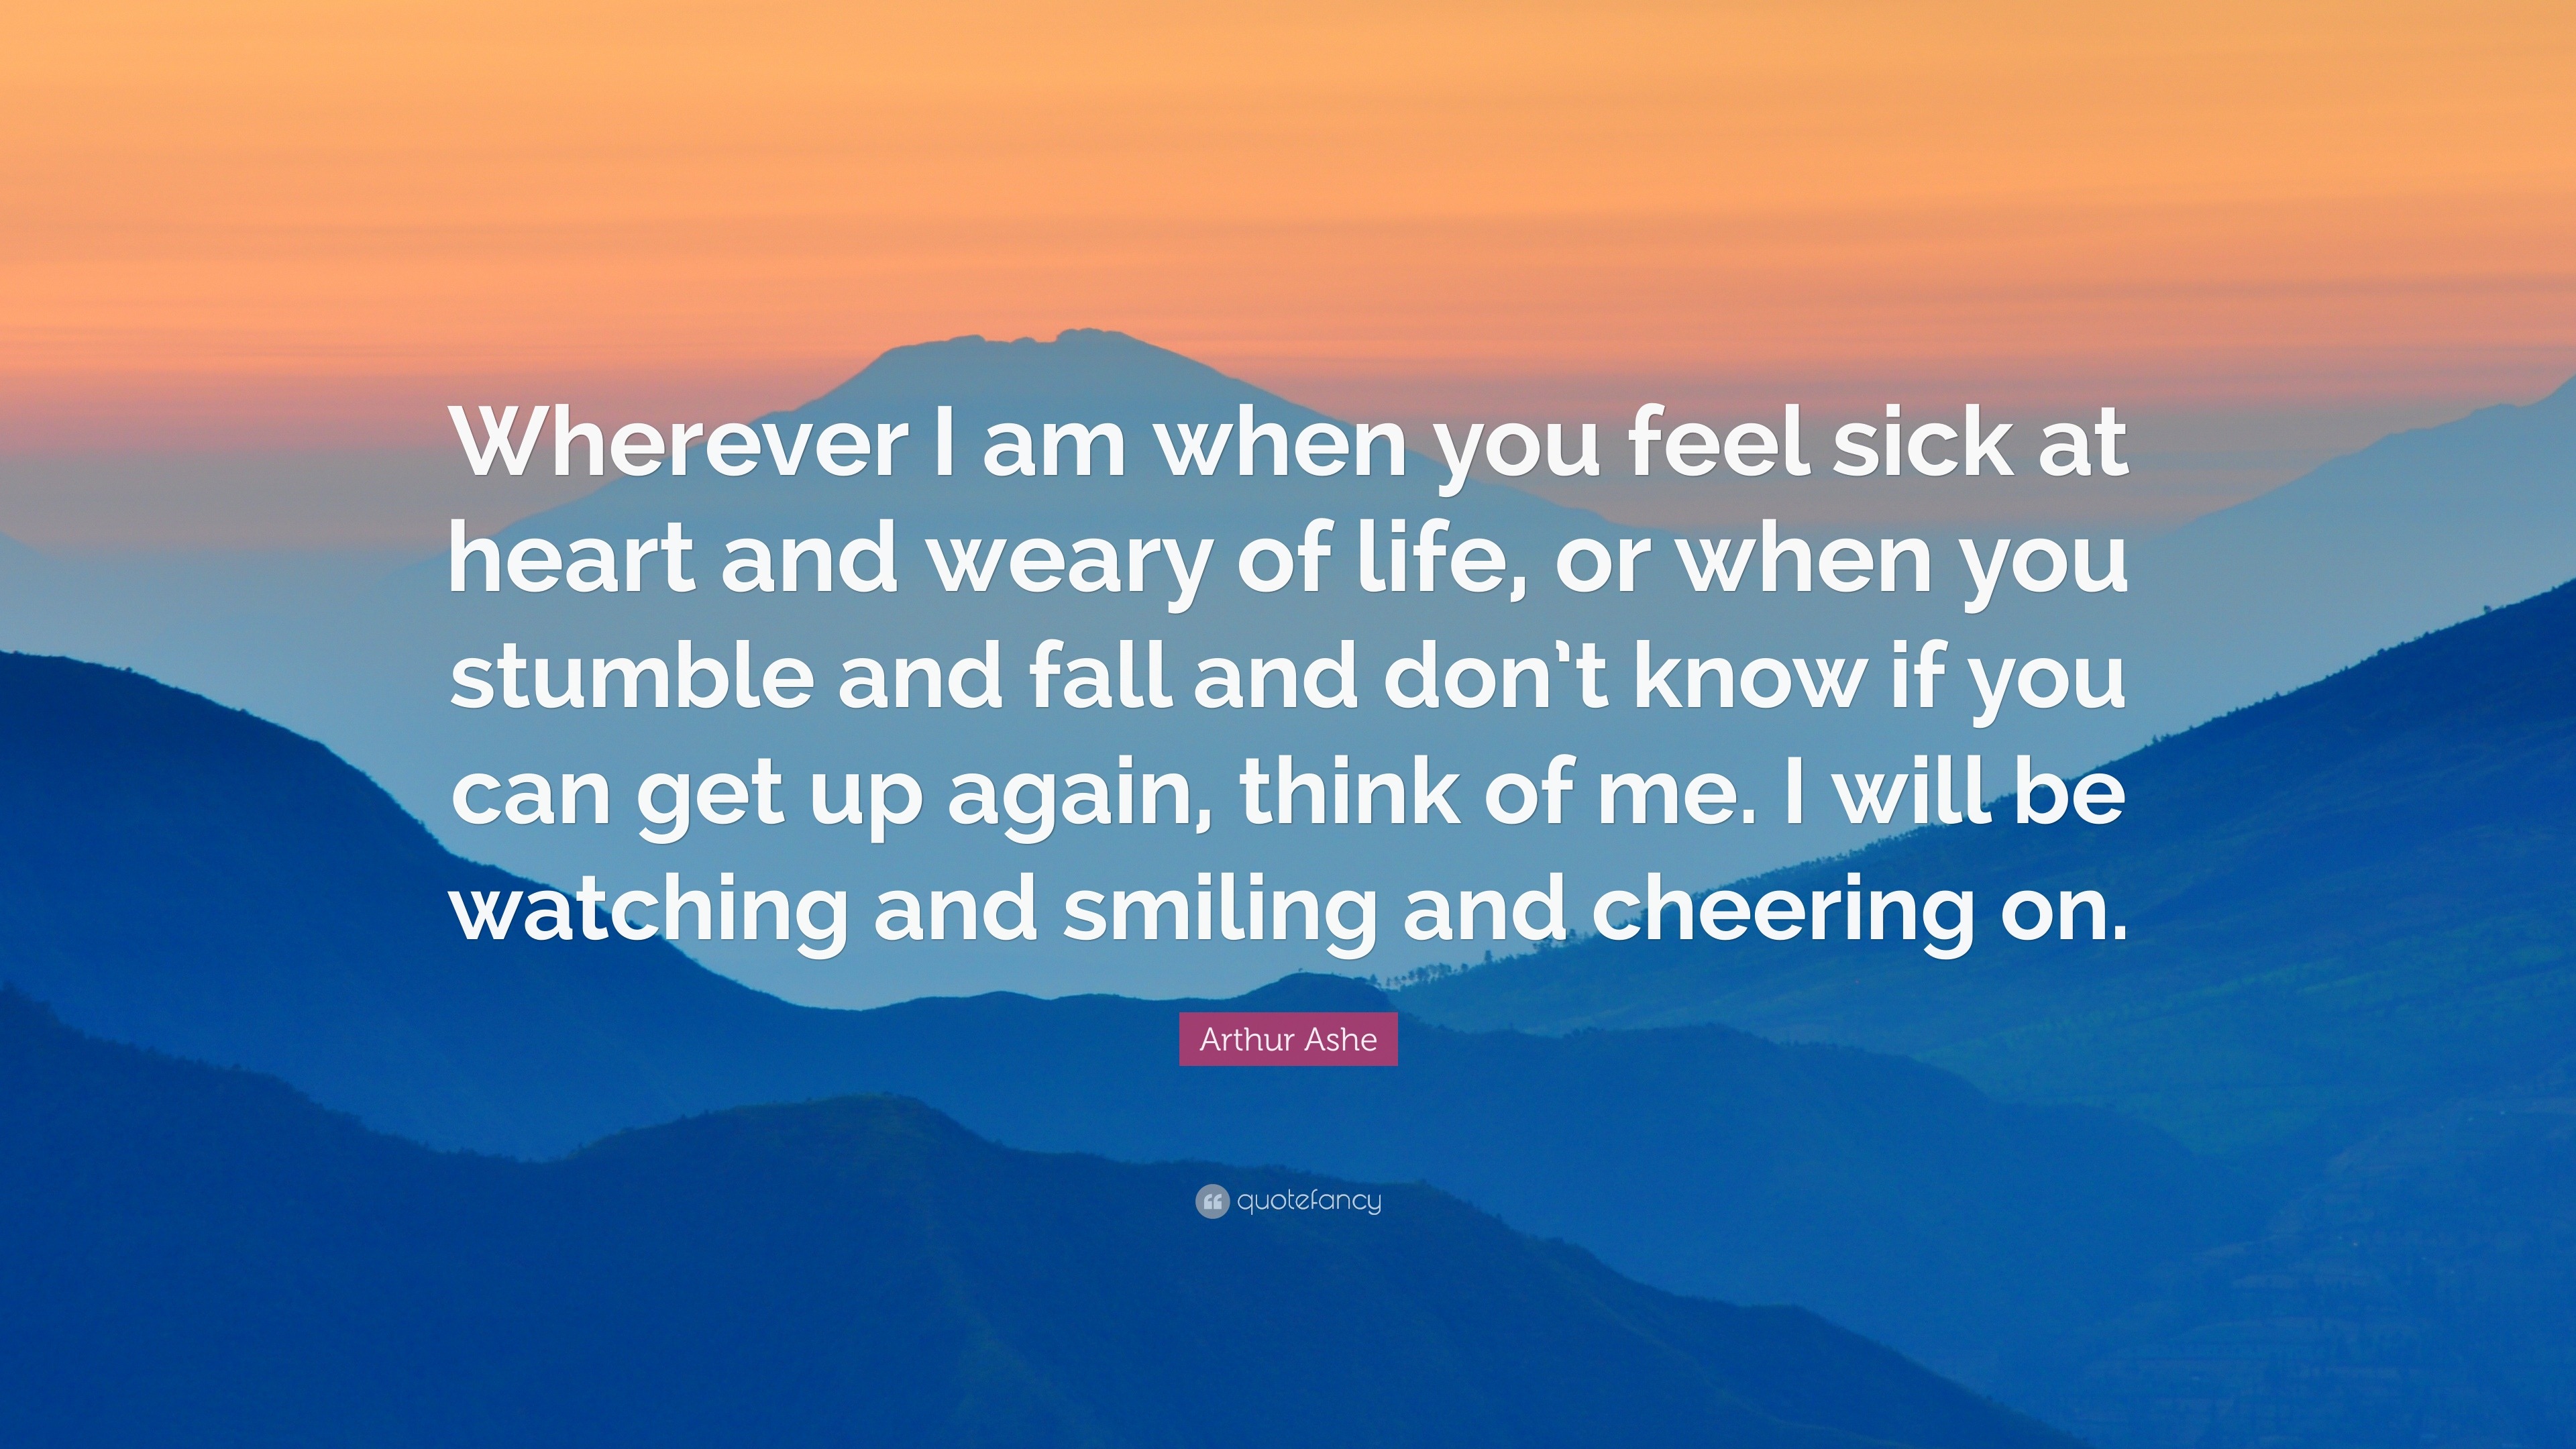 Arthur Ashe Quote: “Wherever I am when you feel sick at heart and weary ...